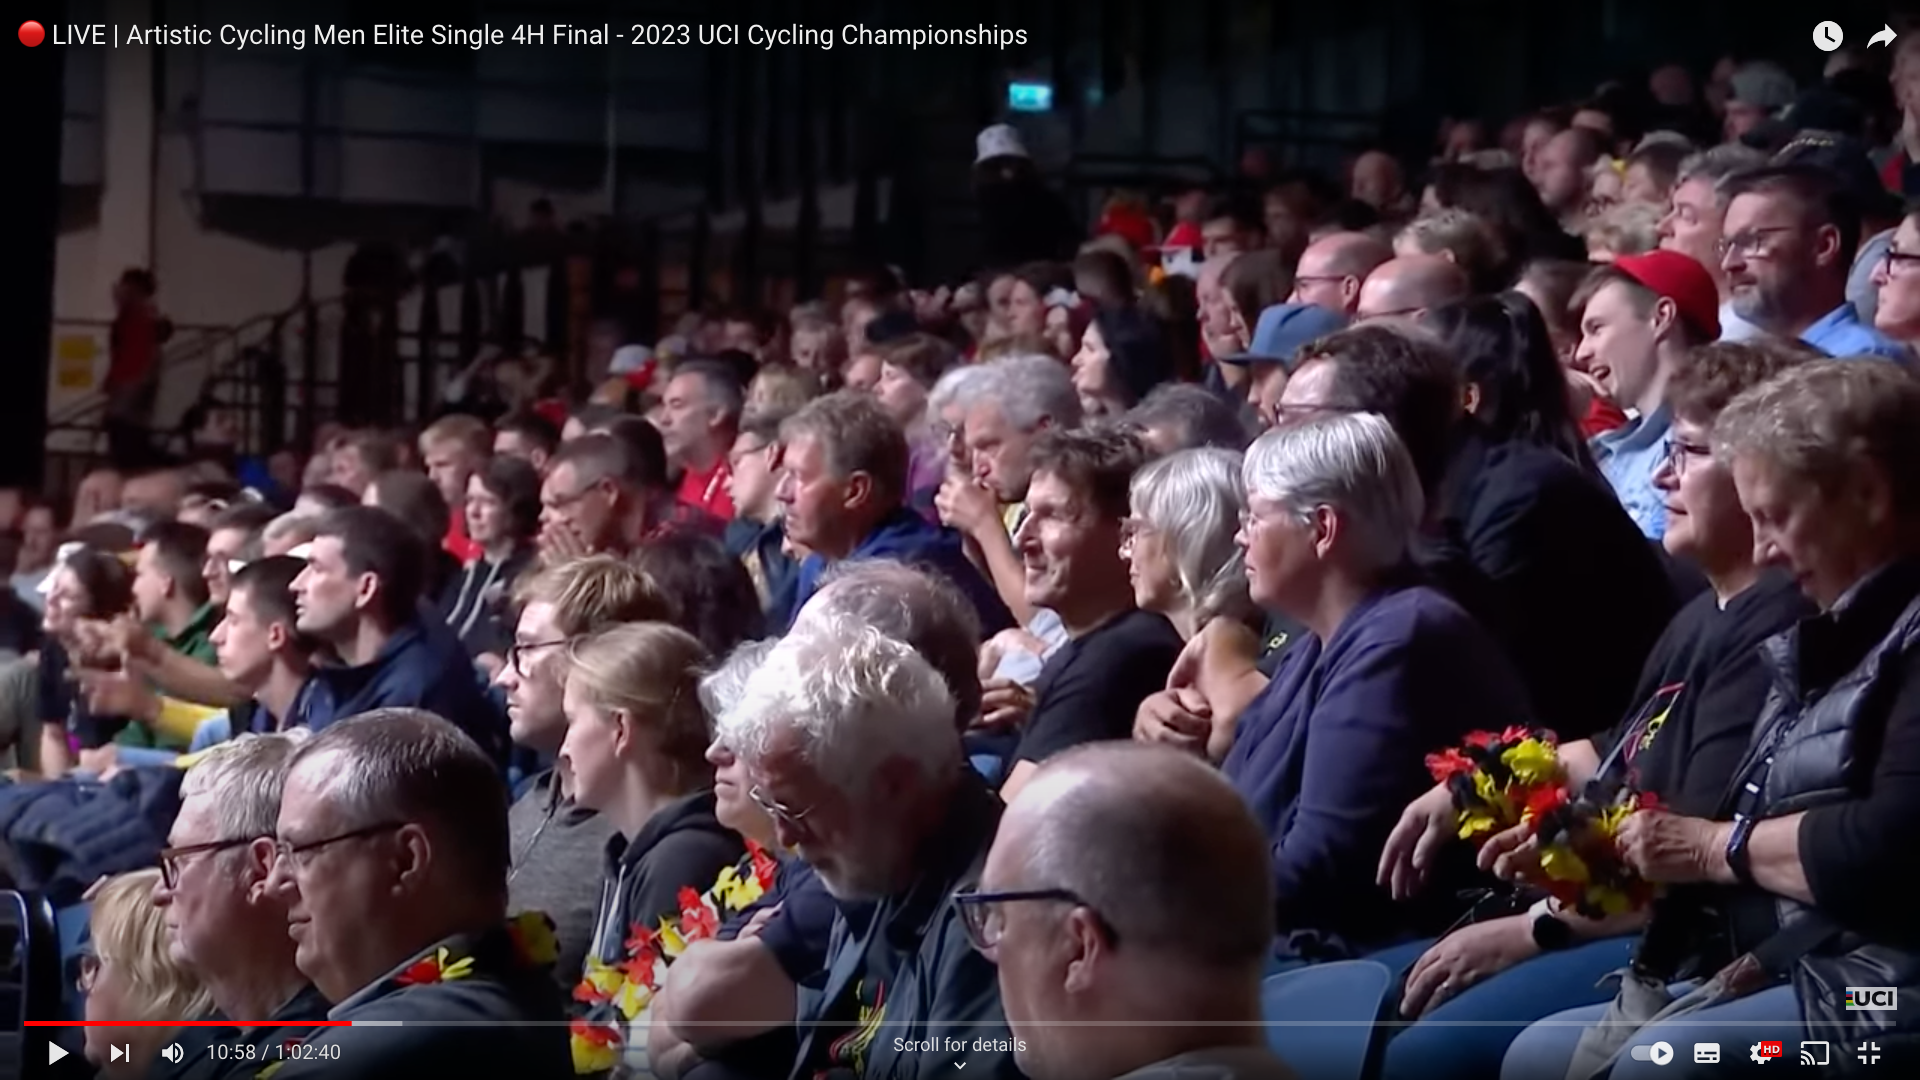 Youtube screenshot of spectators, with German fans in foreground. 